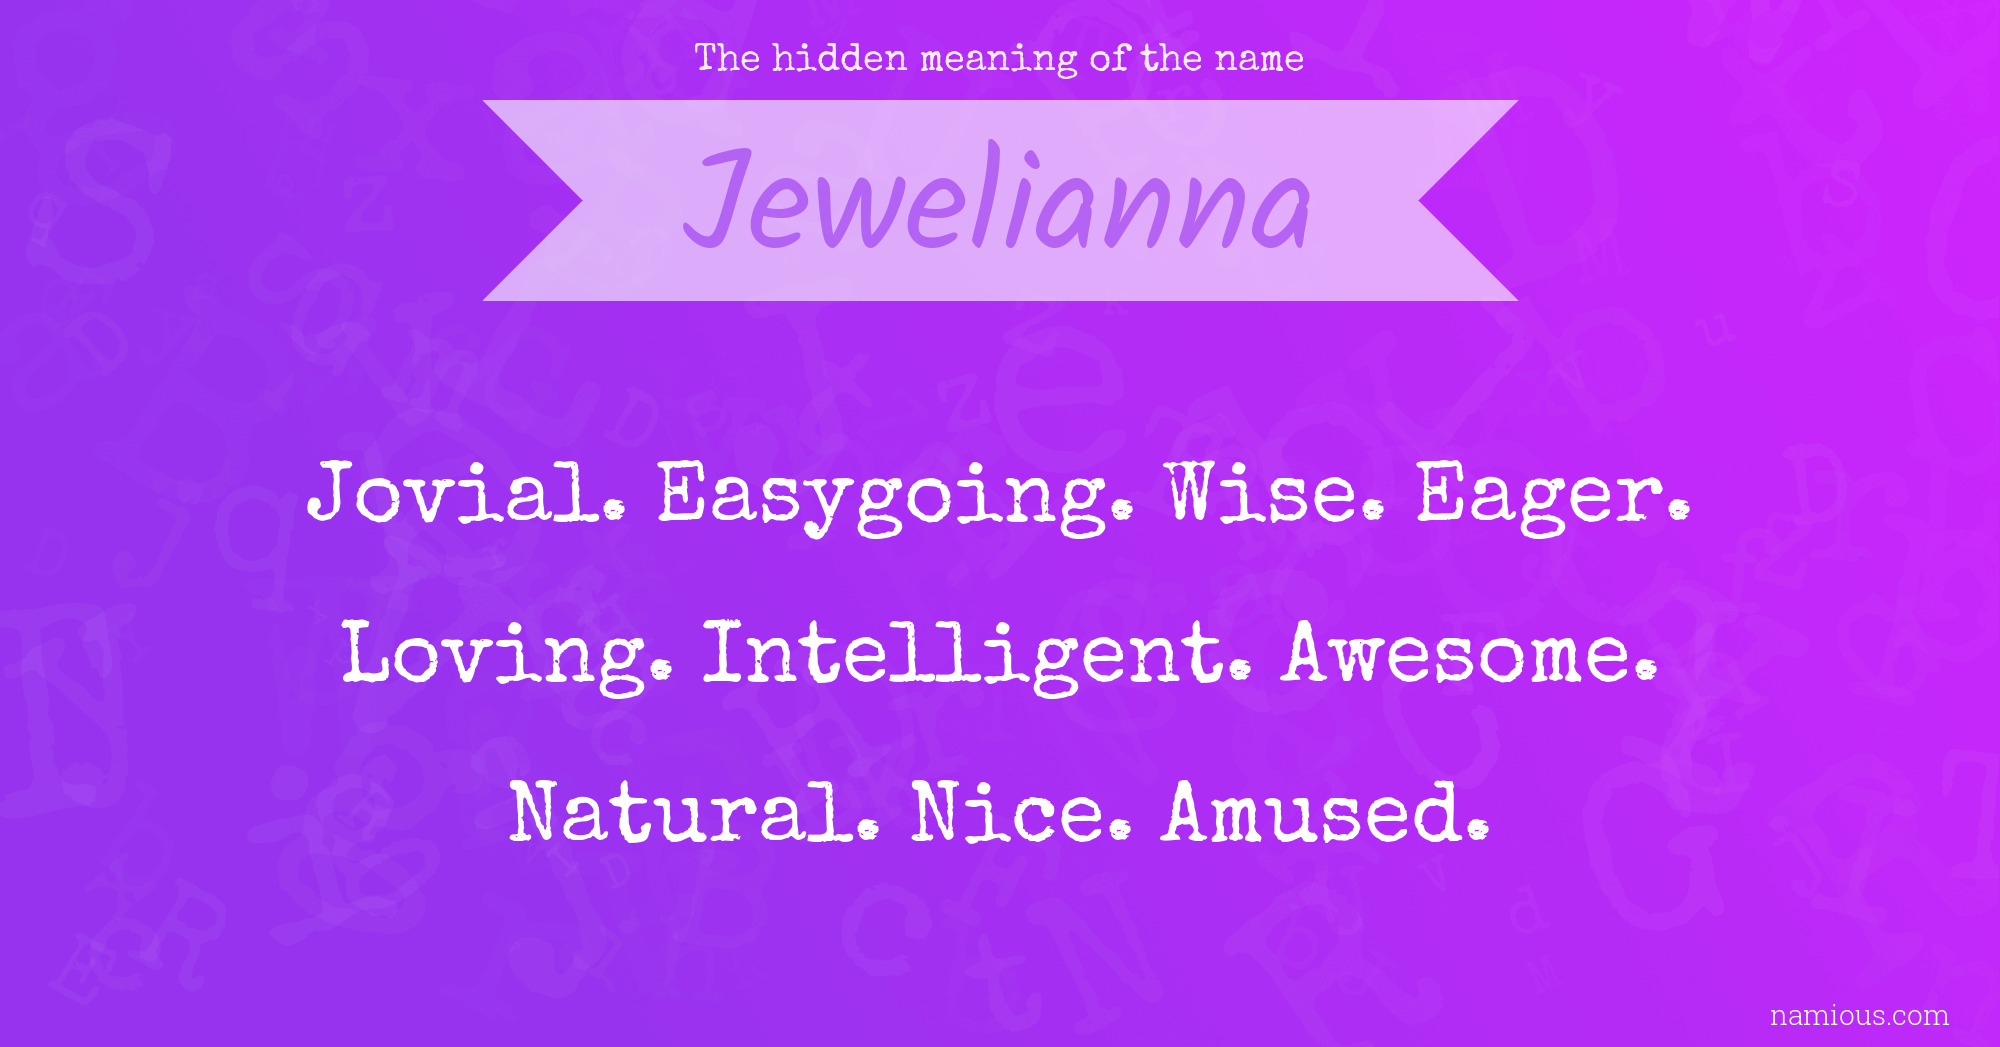 The hidden meaning of the name Jewelianna